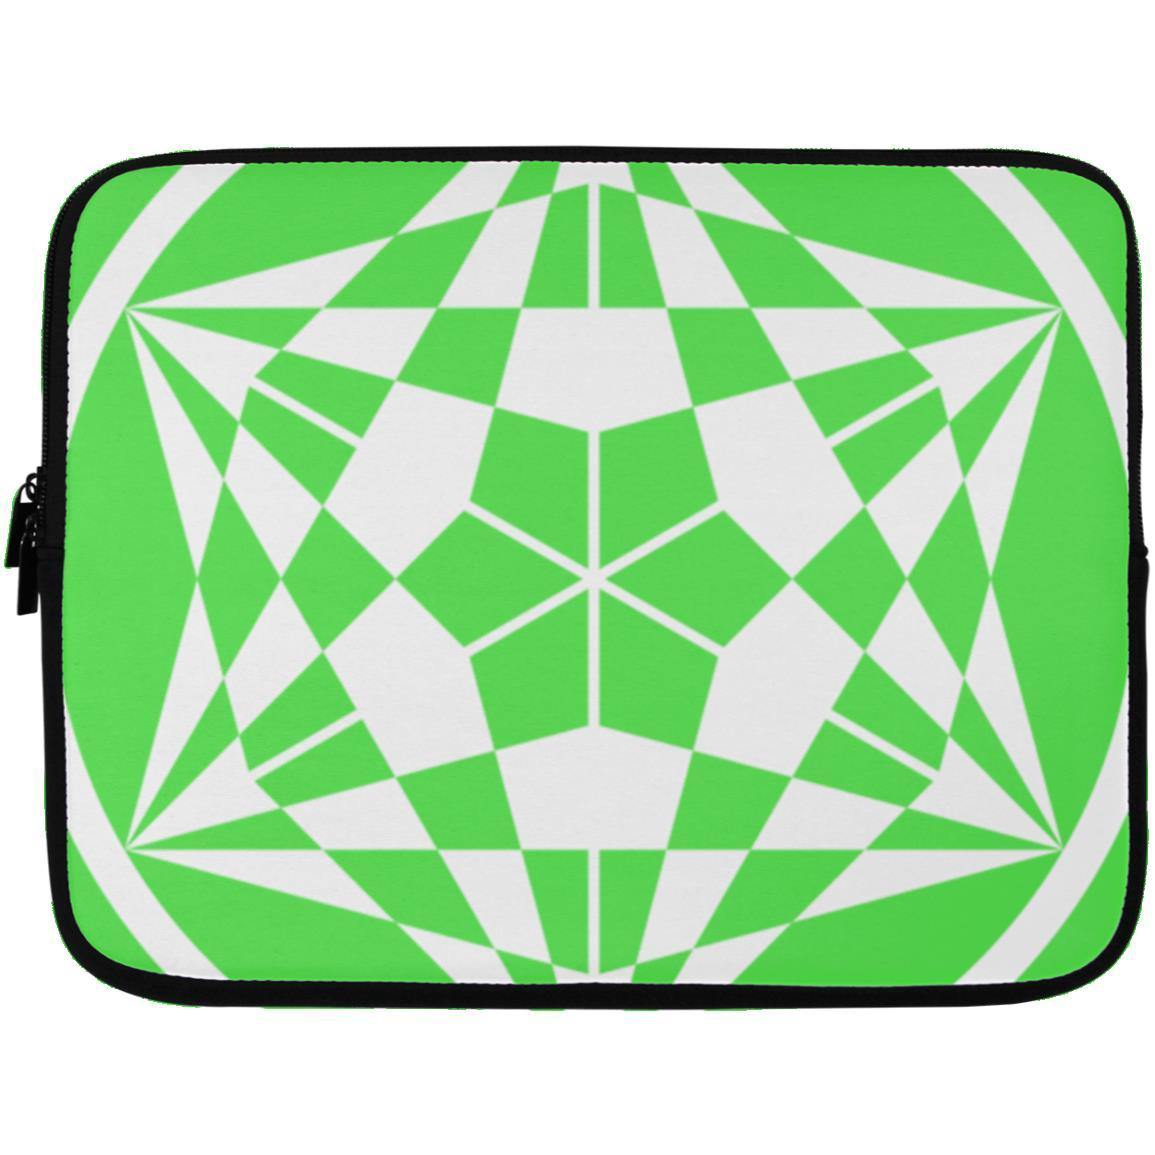 Crop Circle Laptop Sleeve - Dodworth - Shapes of Wisdom